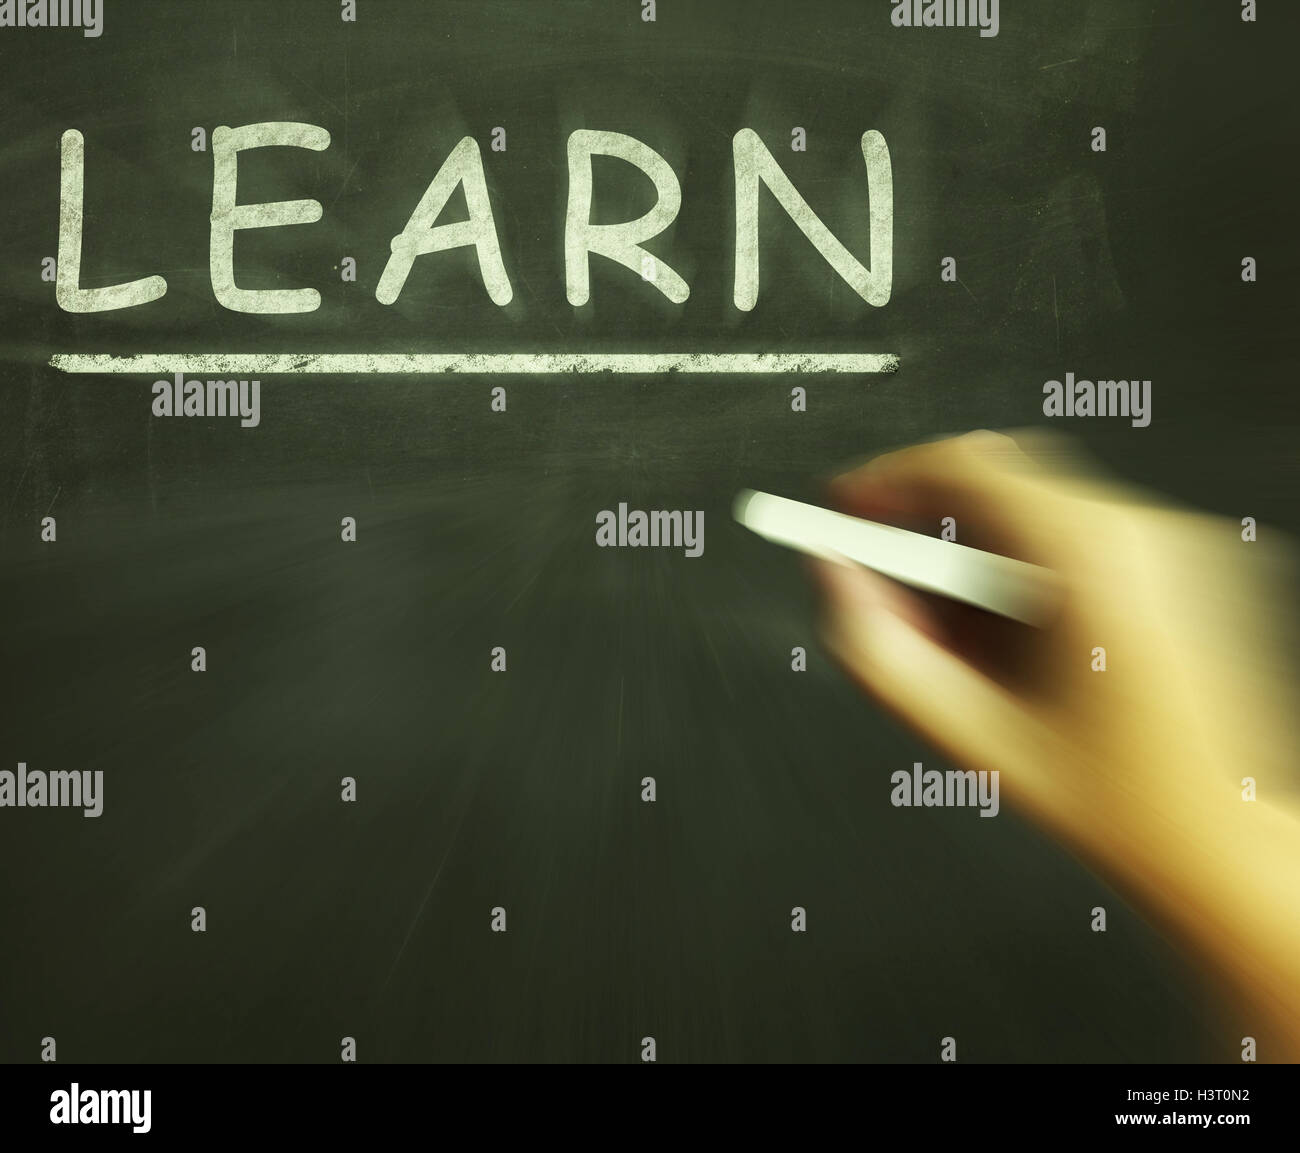 Learn Chalk Means Student Education And Subjects Stock Photo